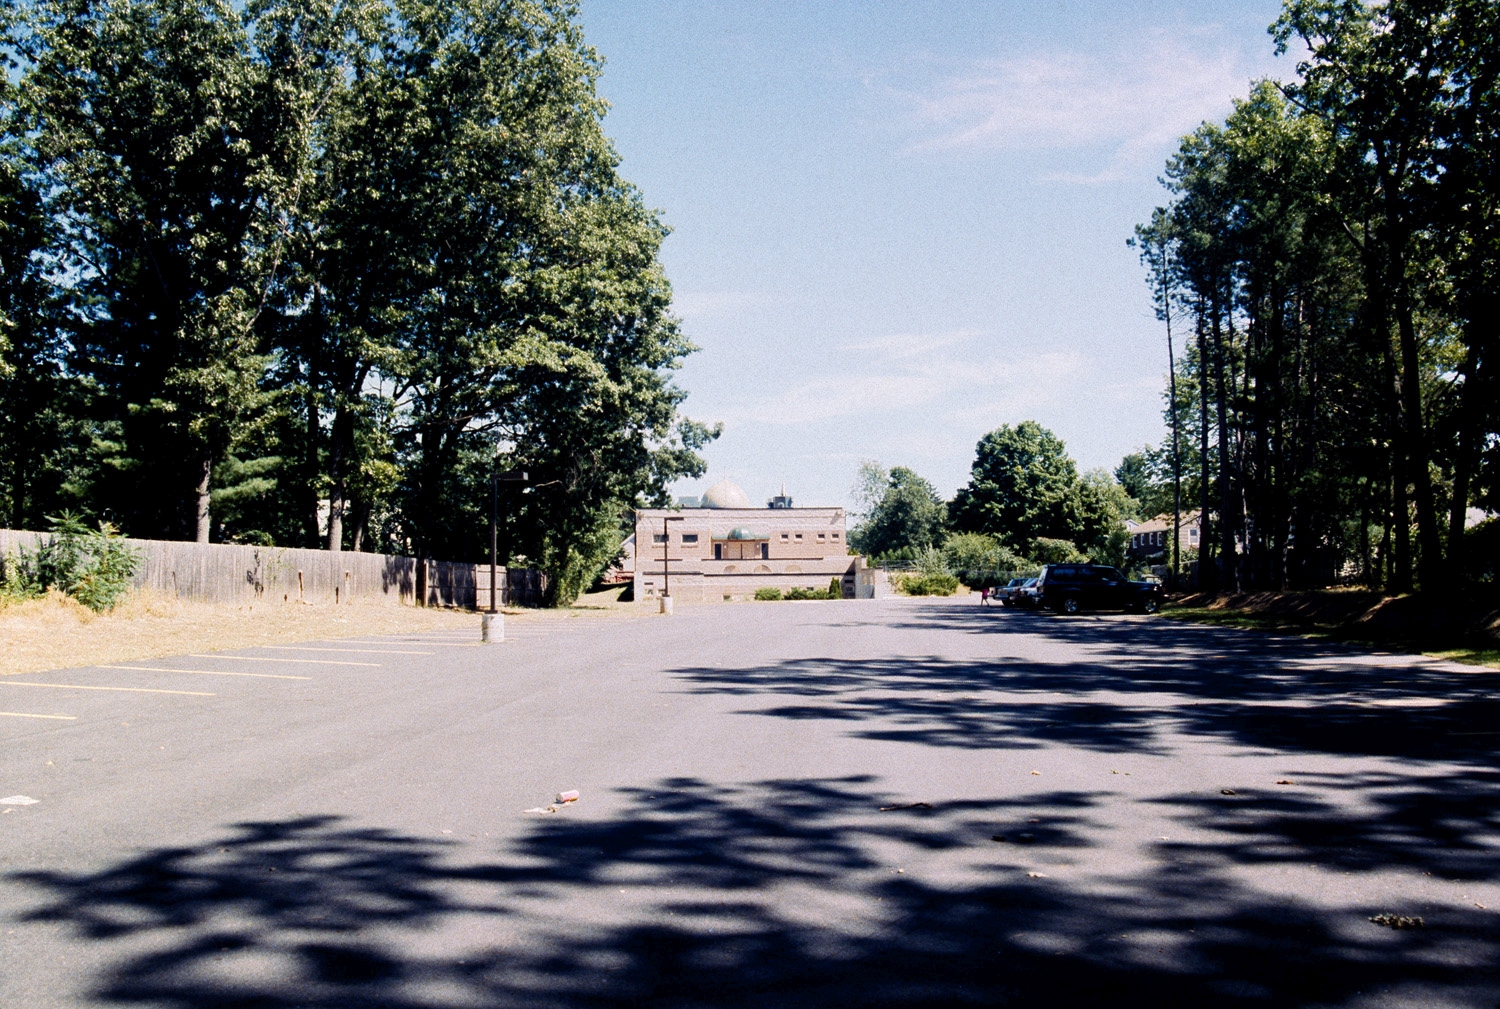 Islamic Society of Western Massachusetts - View across parking lot towards rear of original mosque, prior to expansion